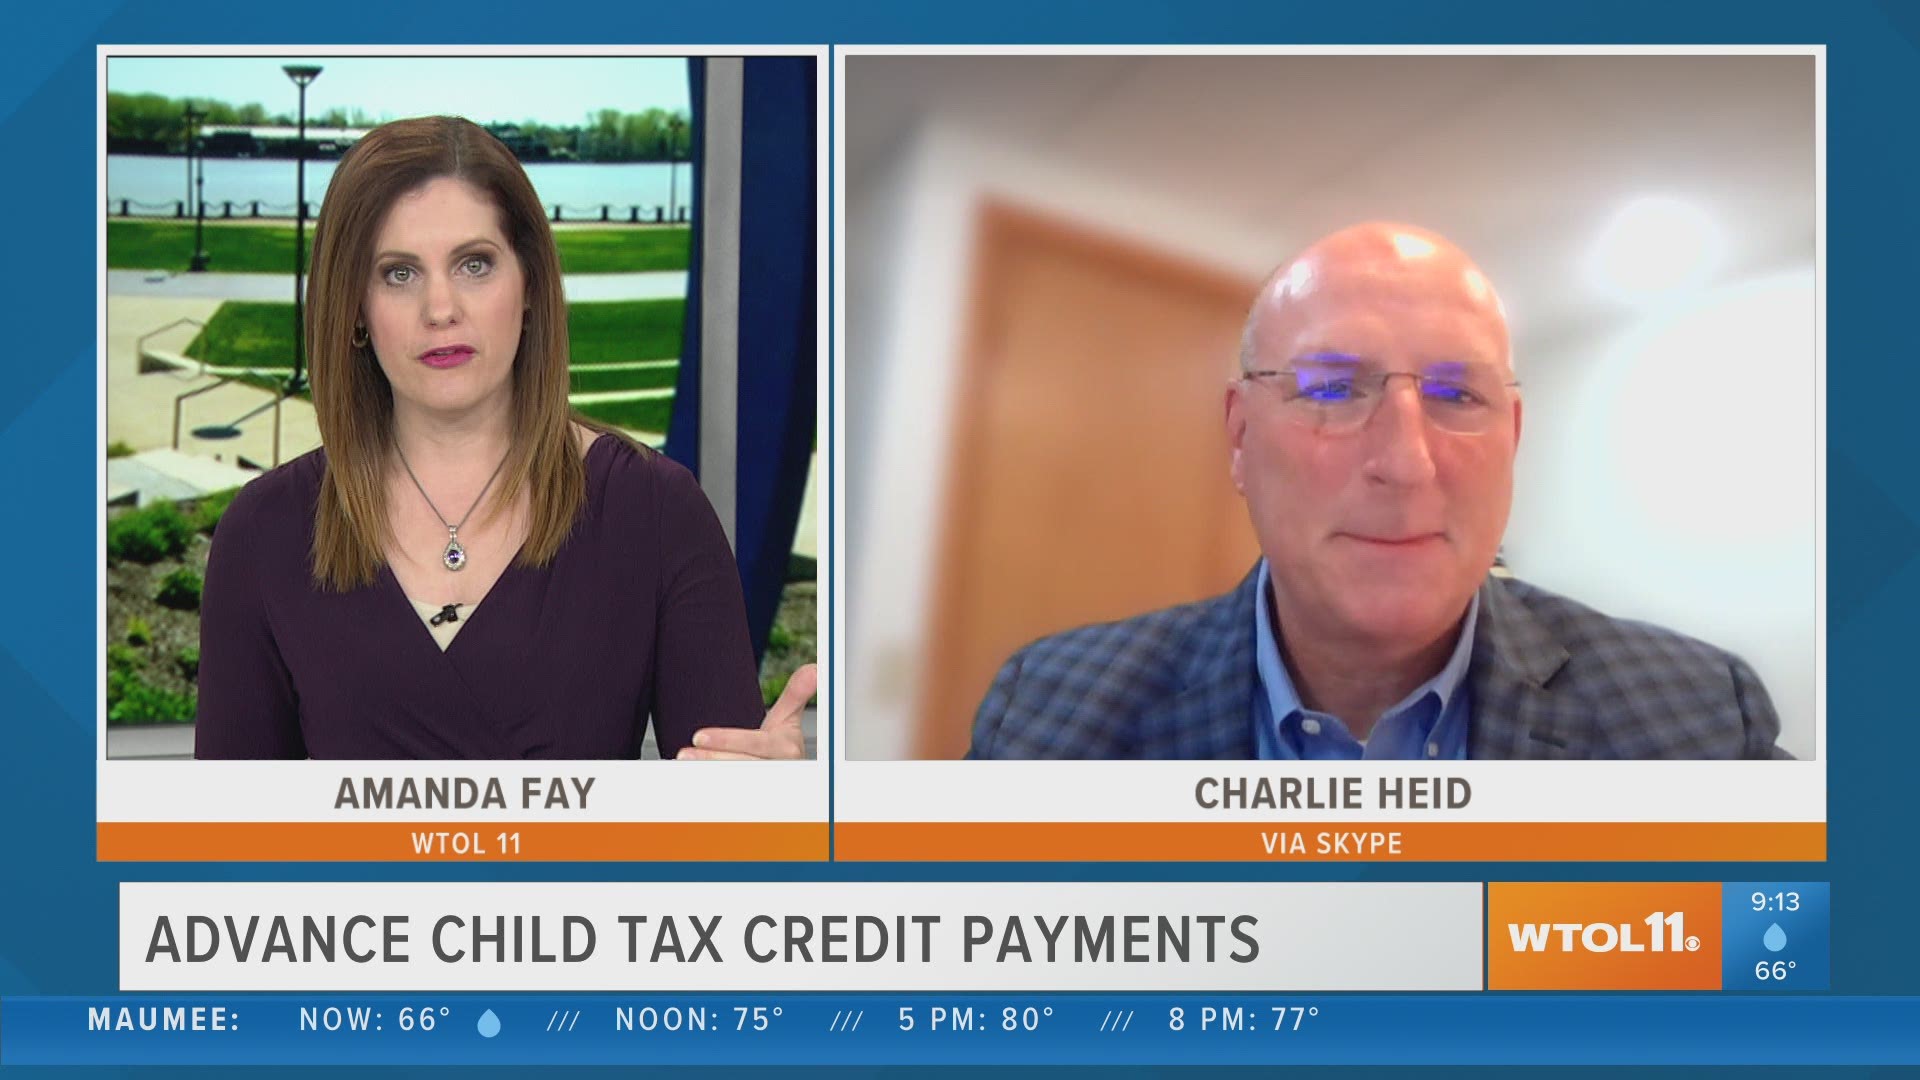 If you don’t normally file taxes, you may still qualify for the Advance Child Tax Credit payments. CPA Charlie Heid explains.